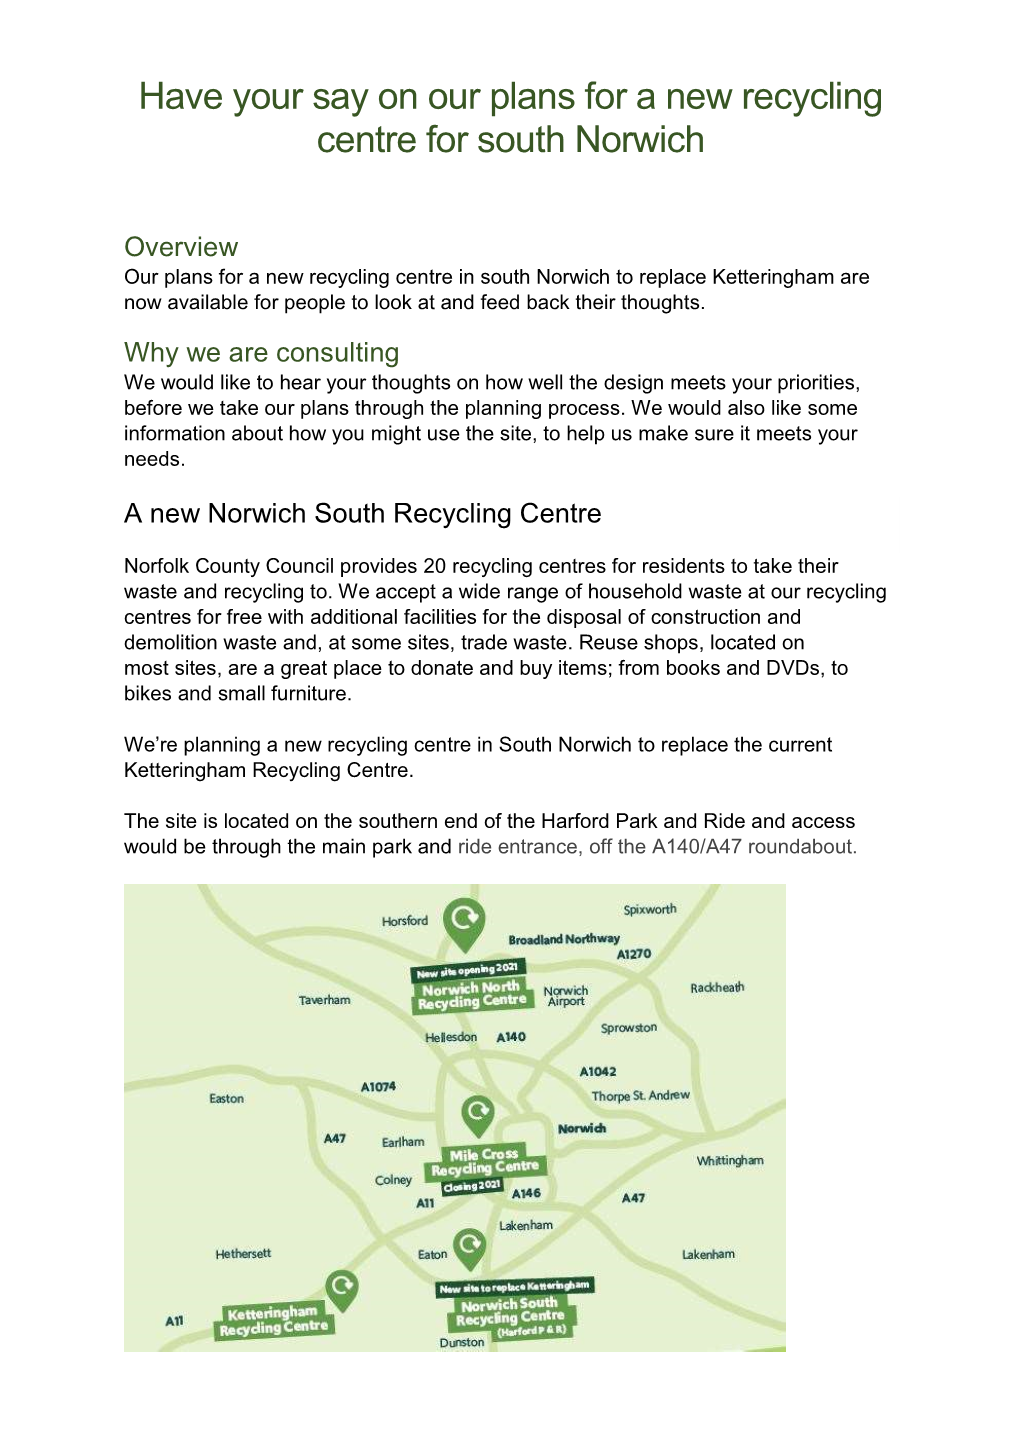 Have Your Say on Our Plans for a New Recycling Centre for South Norwich